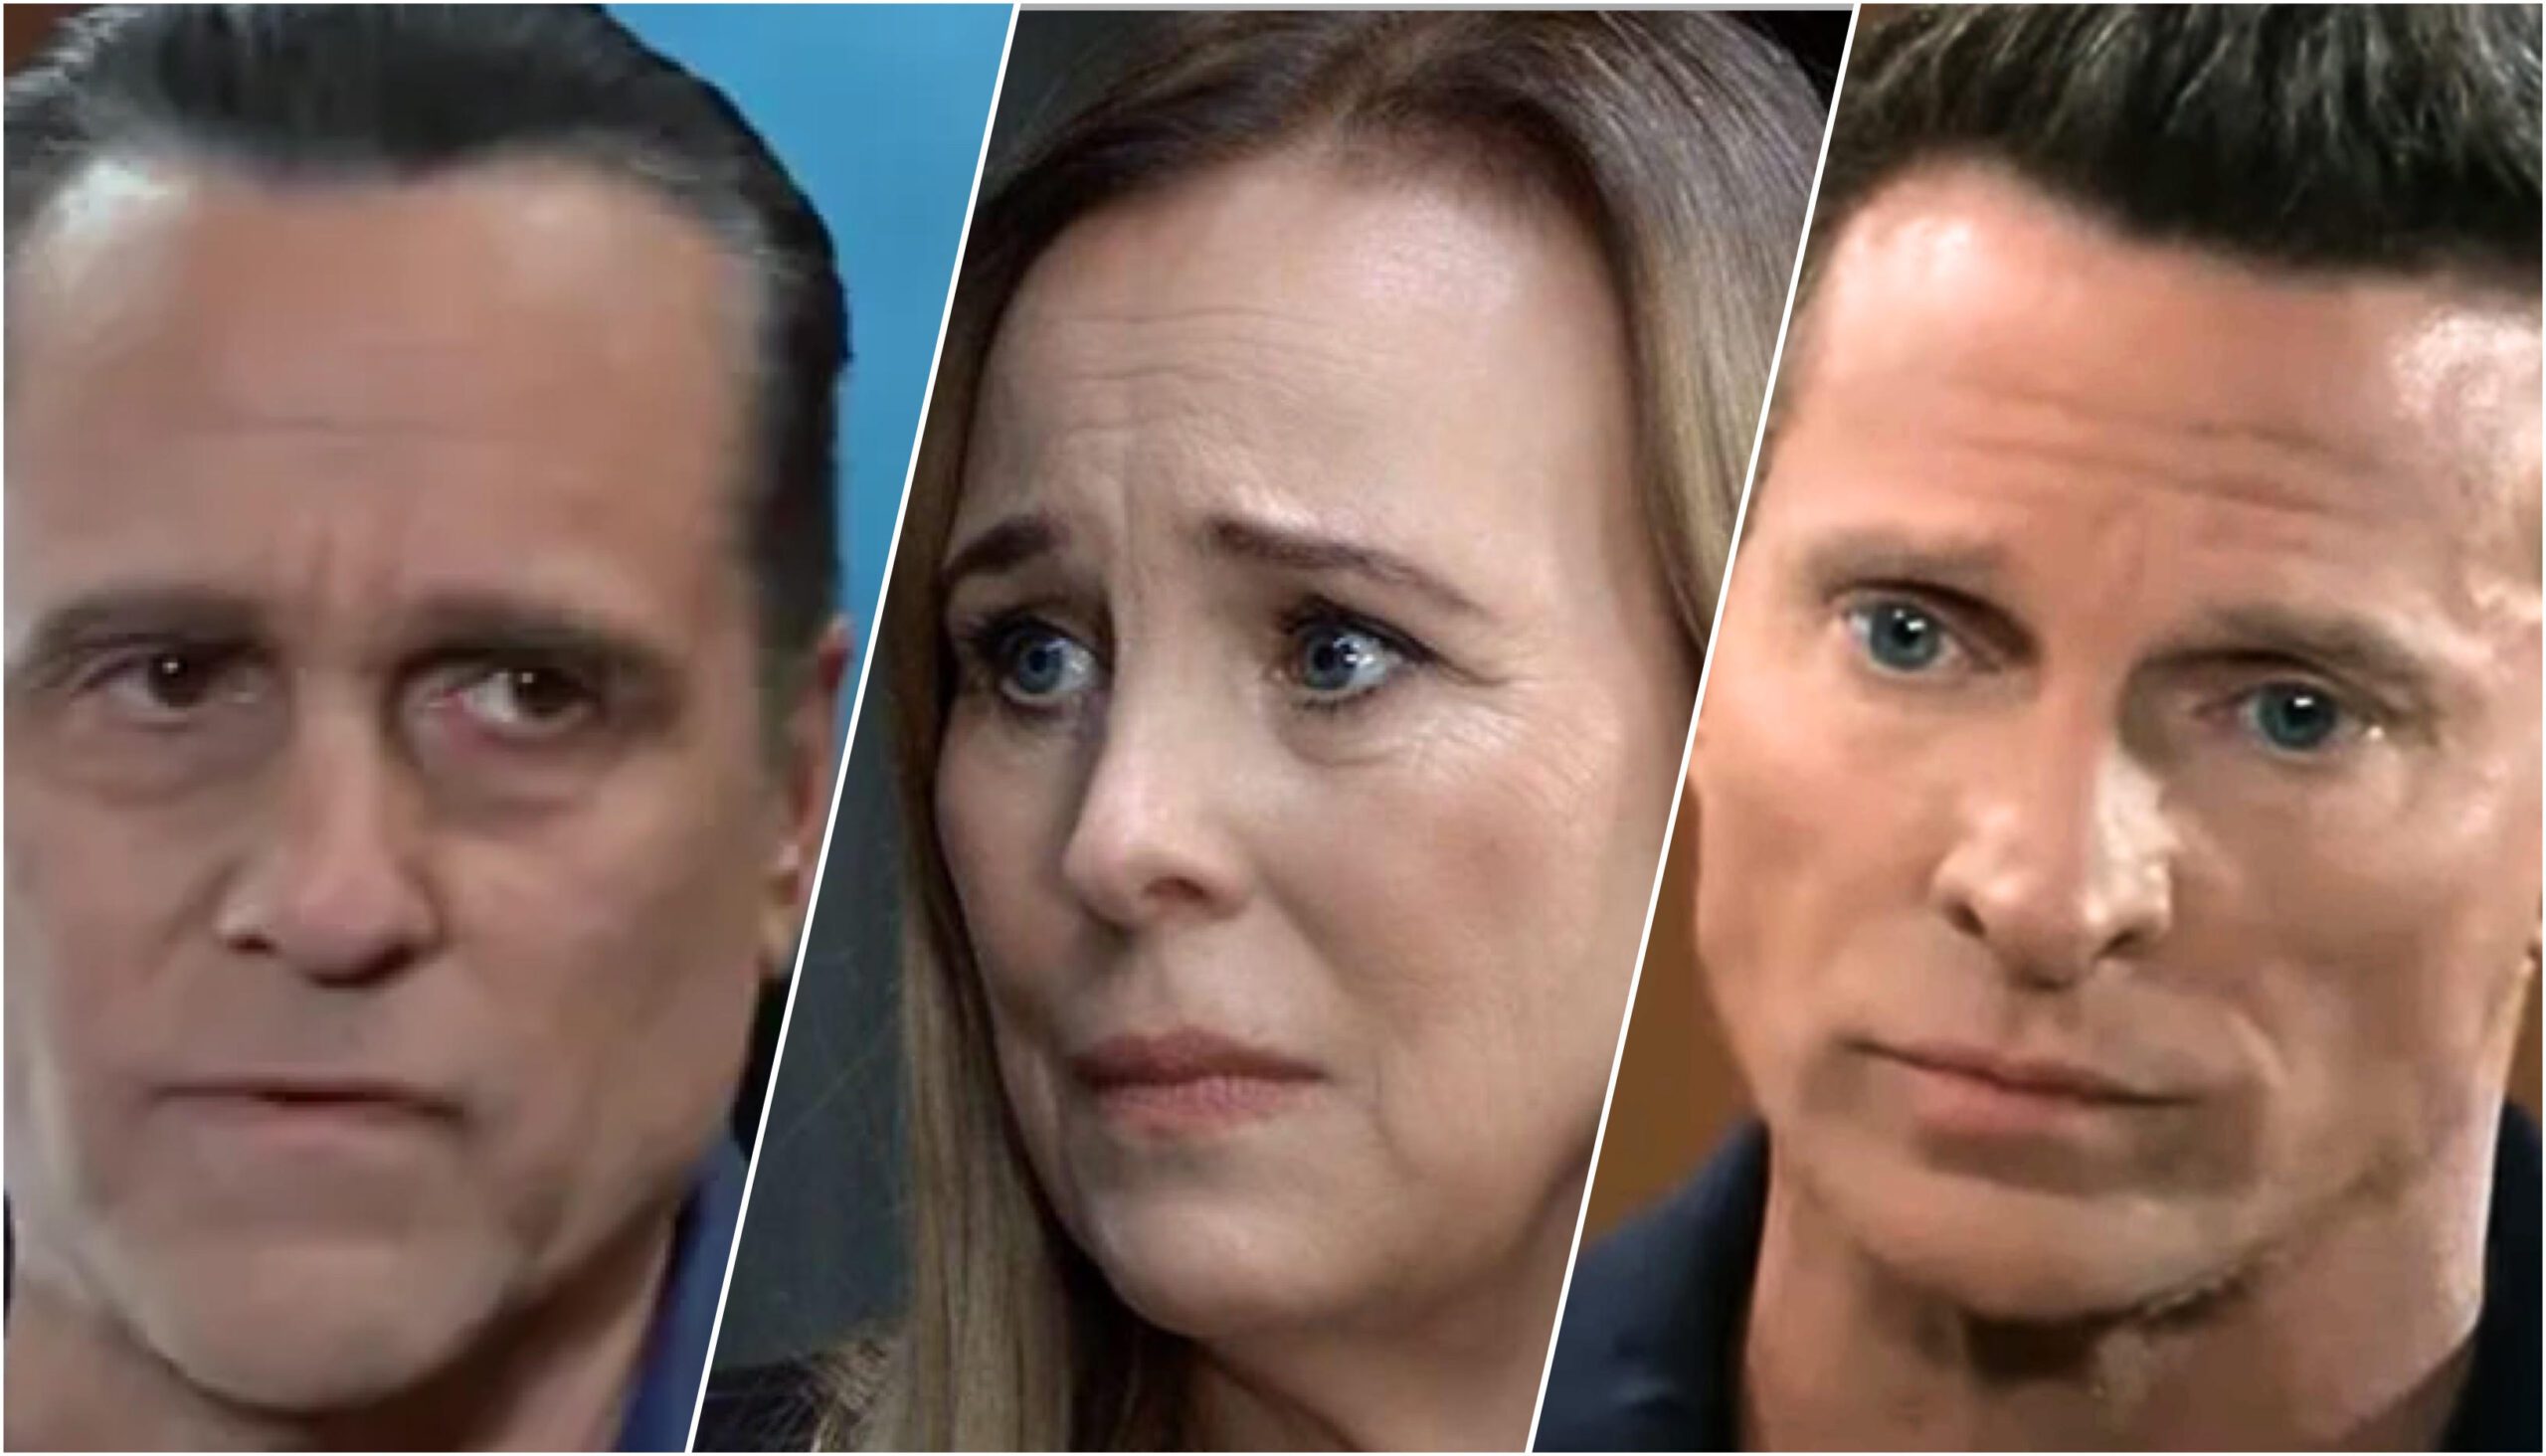 Sonny Corinthos Laura Spencer and Jason Morgan in tense standoff